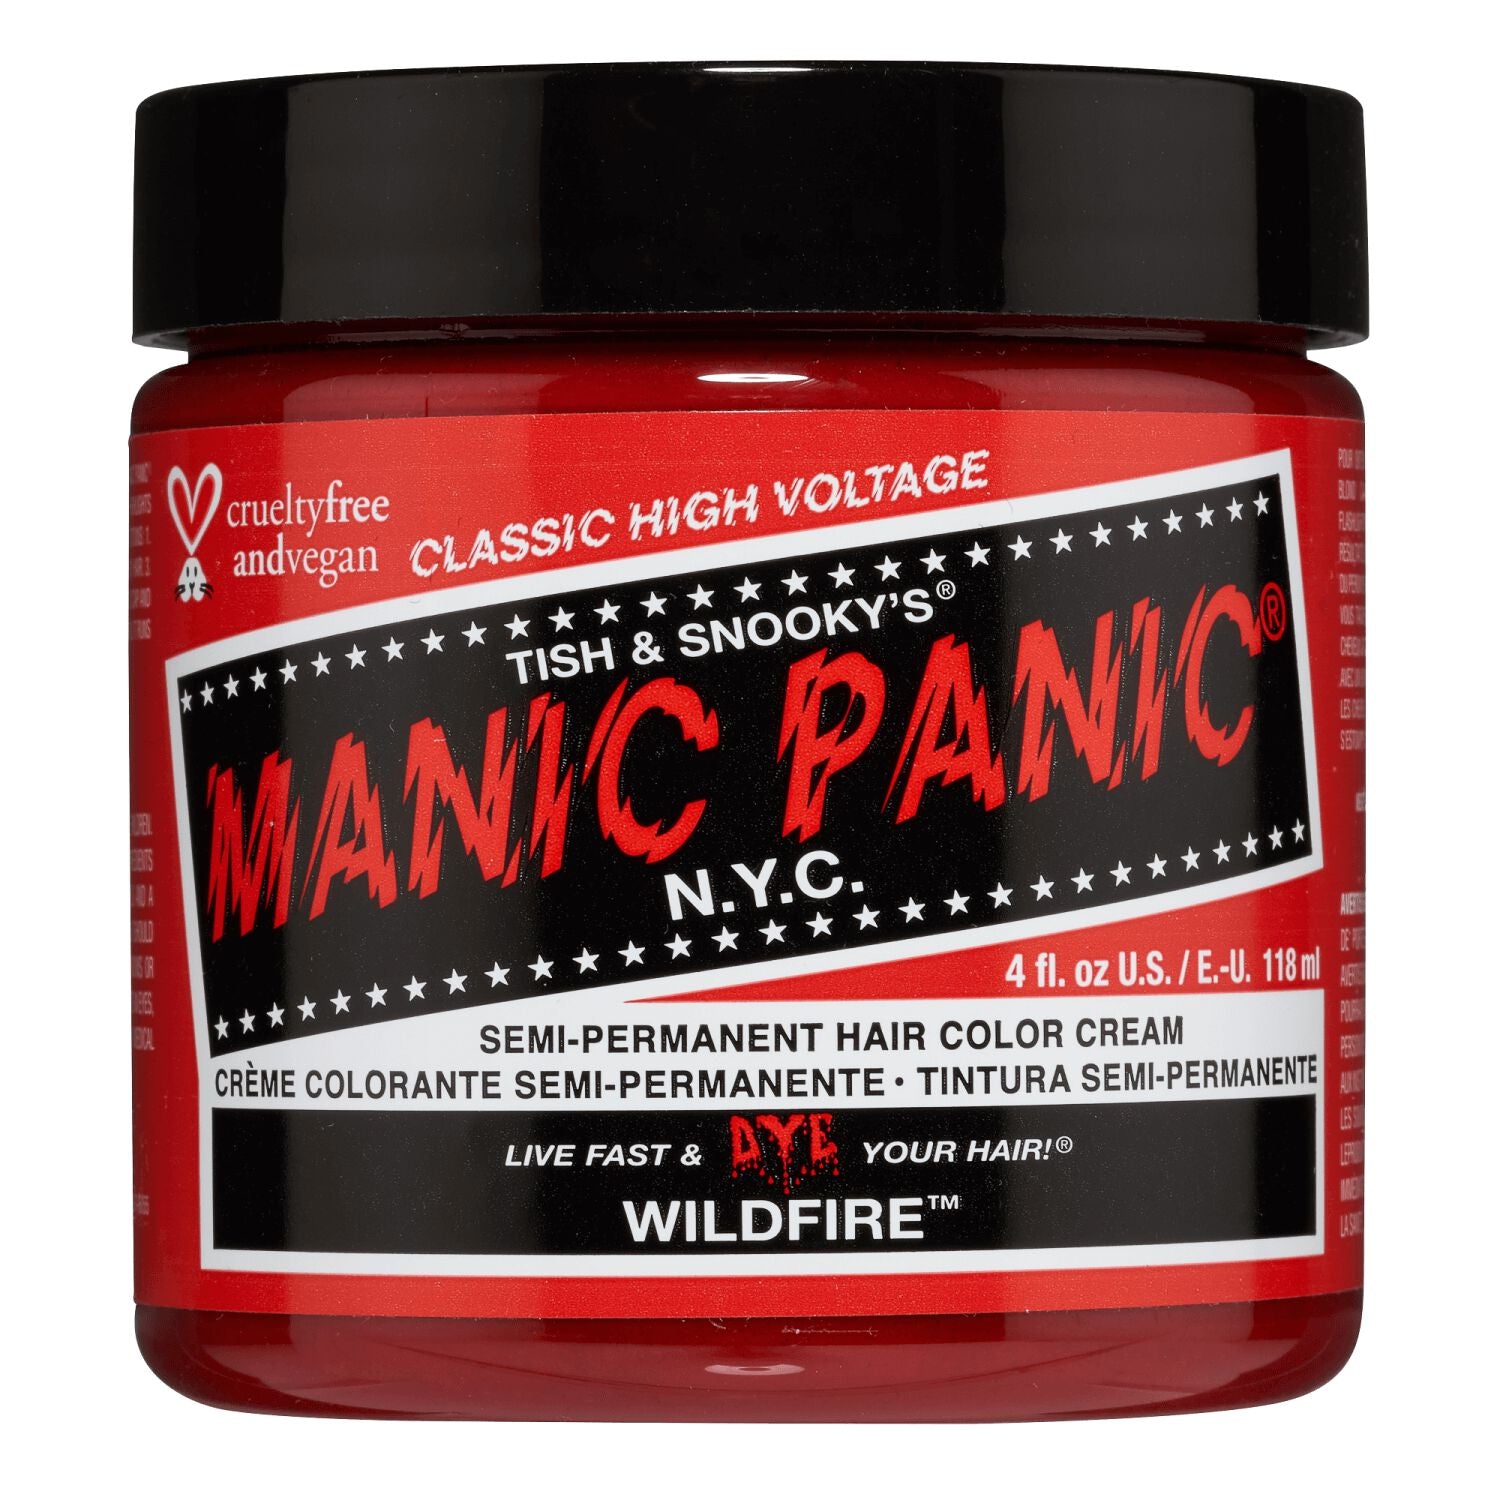 Manic Panic® Classic High Voltage Hair Color - Wildfire